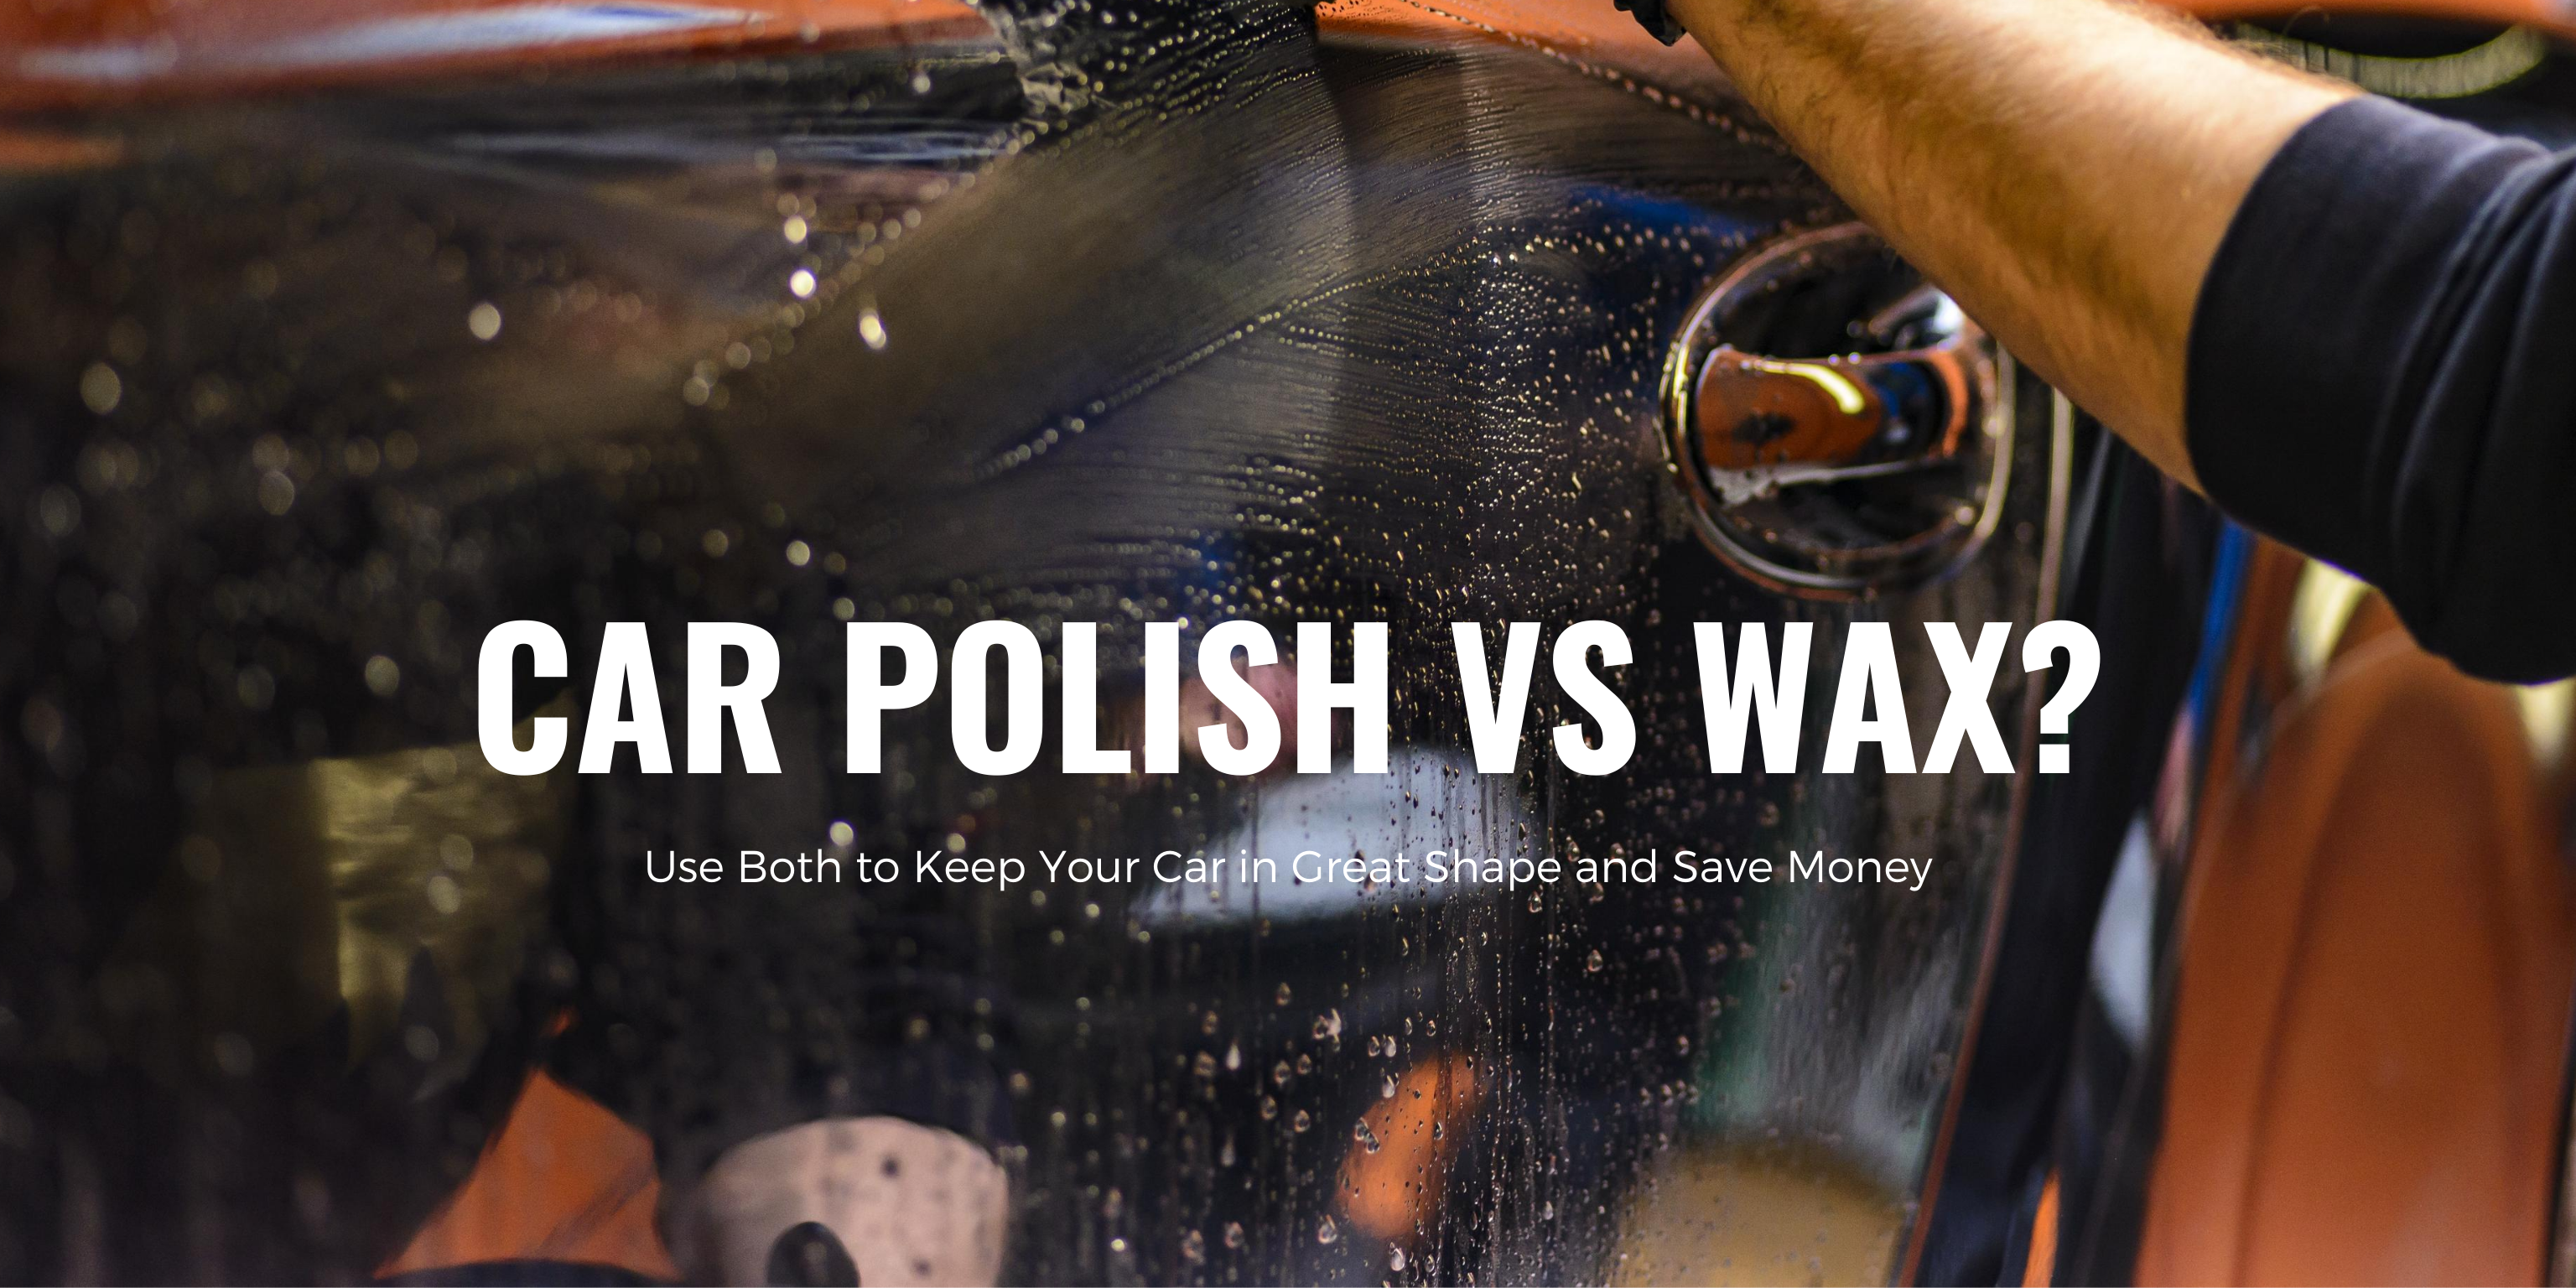 Car Polish Vs Wax? Use Both to Keep Your Car in Great Shape and Save Money